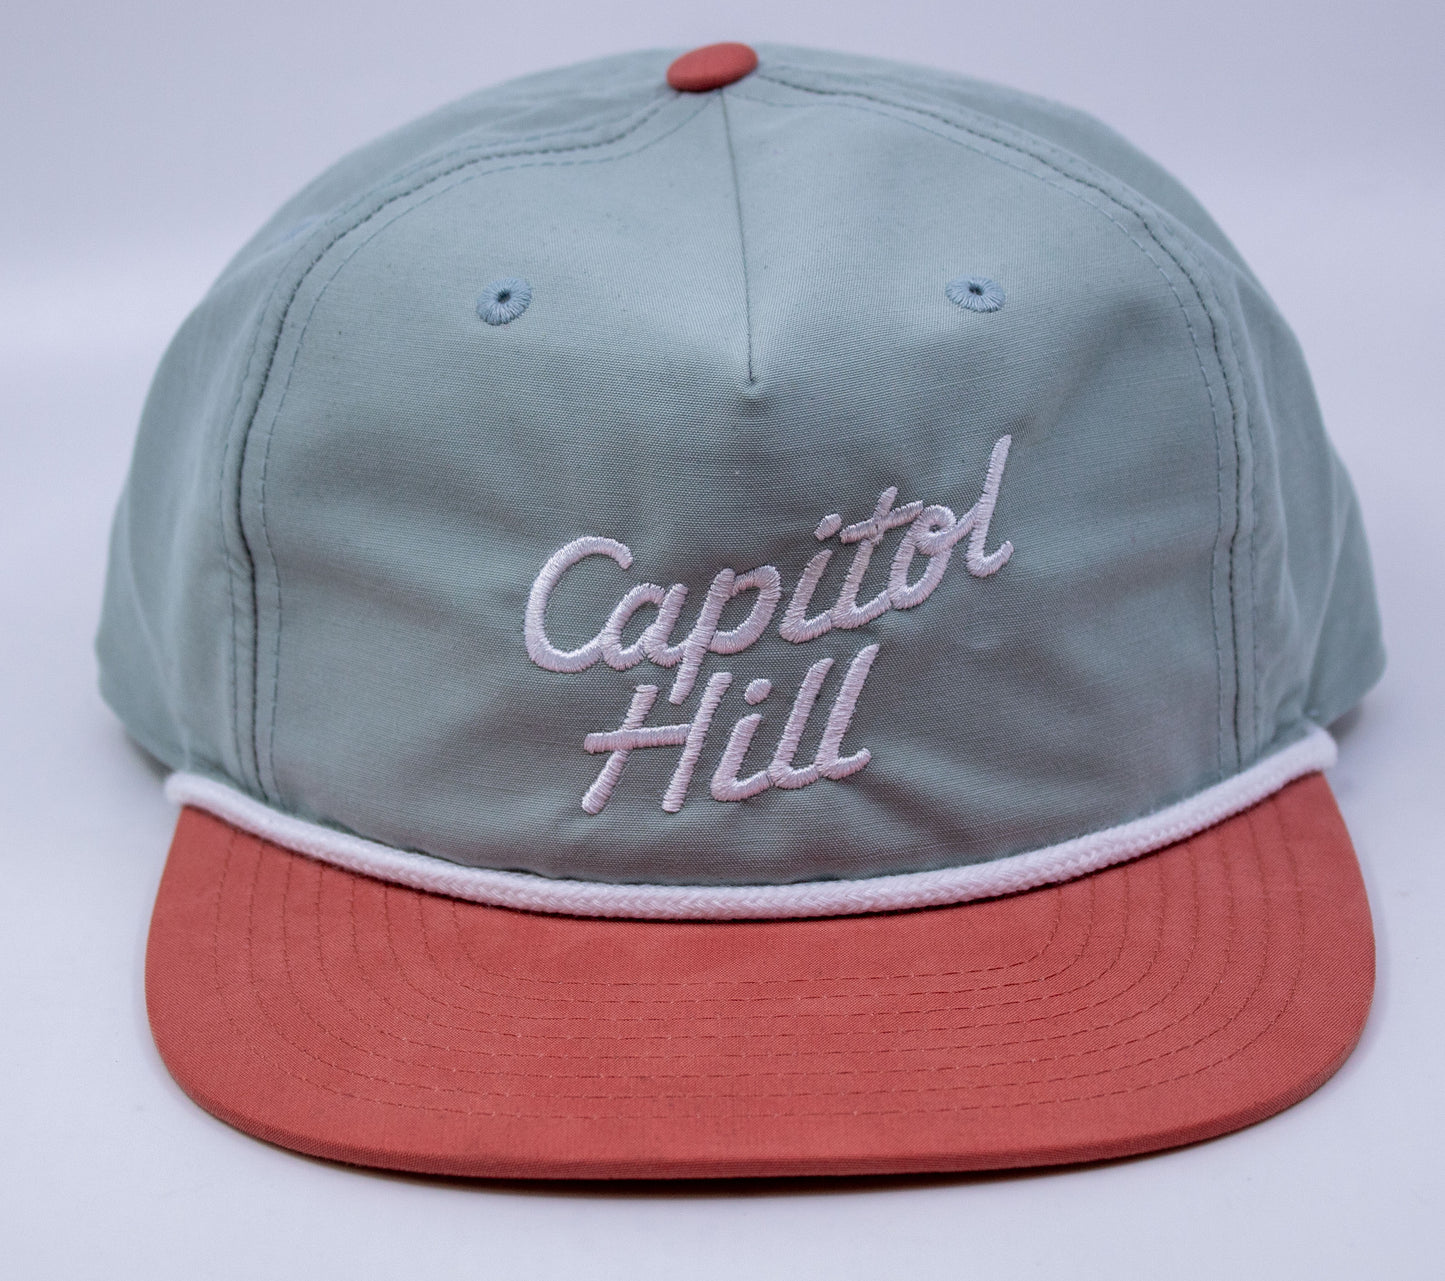 Standard Goods Embroidered Capitol Hill Hat Seafoam